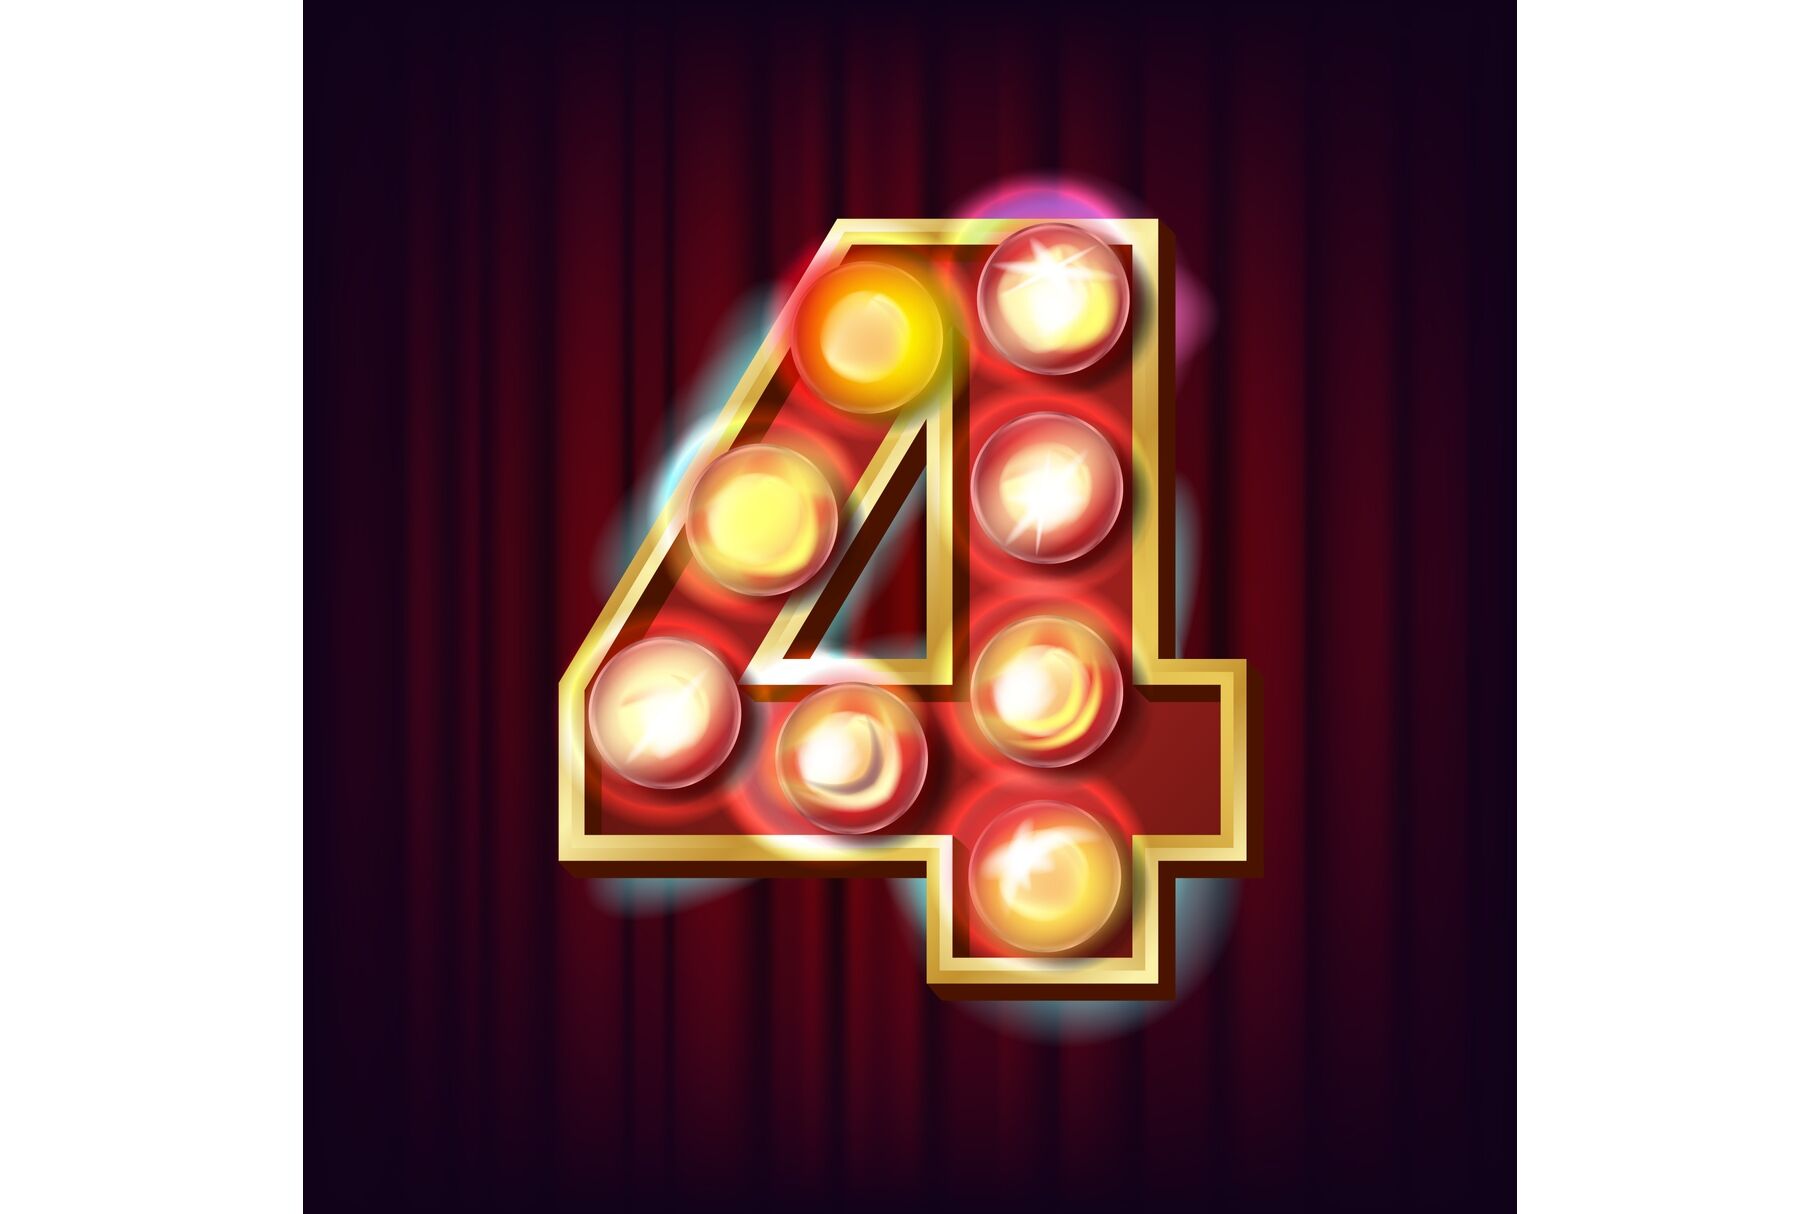 NUMBERS Metal Carnival Style Marquee Light, LED Number Light Battery  Operated Red/white Perfect Night Light, Gift, Photo Prop 